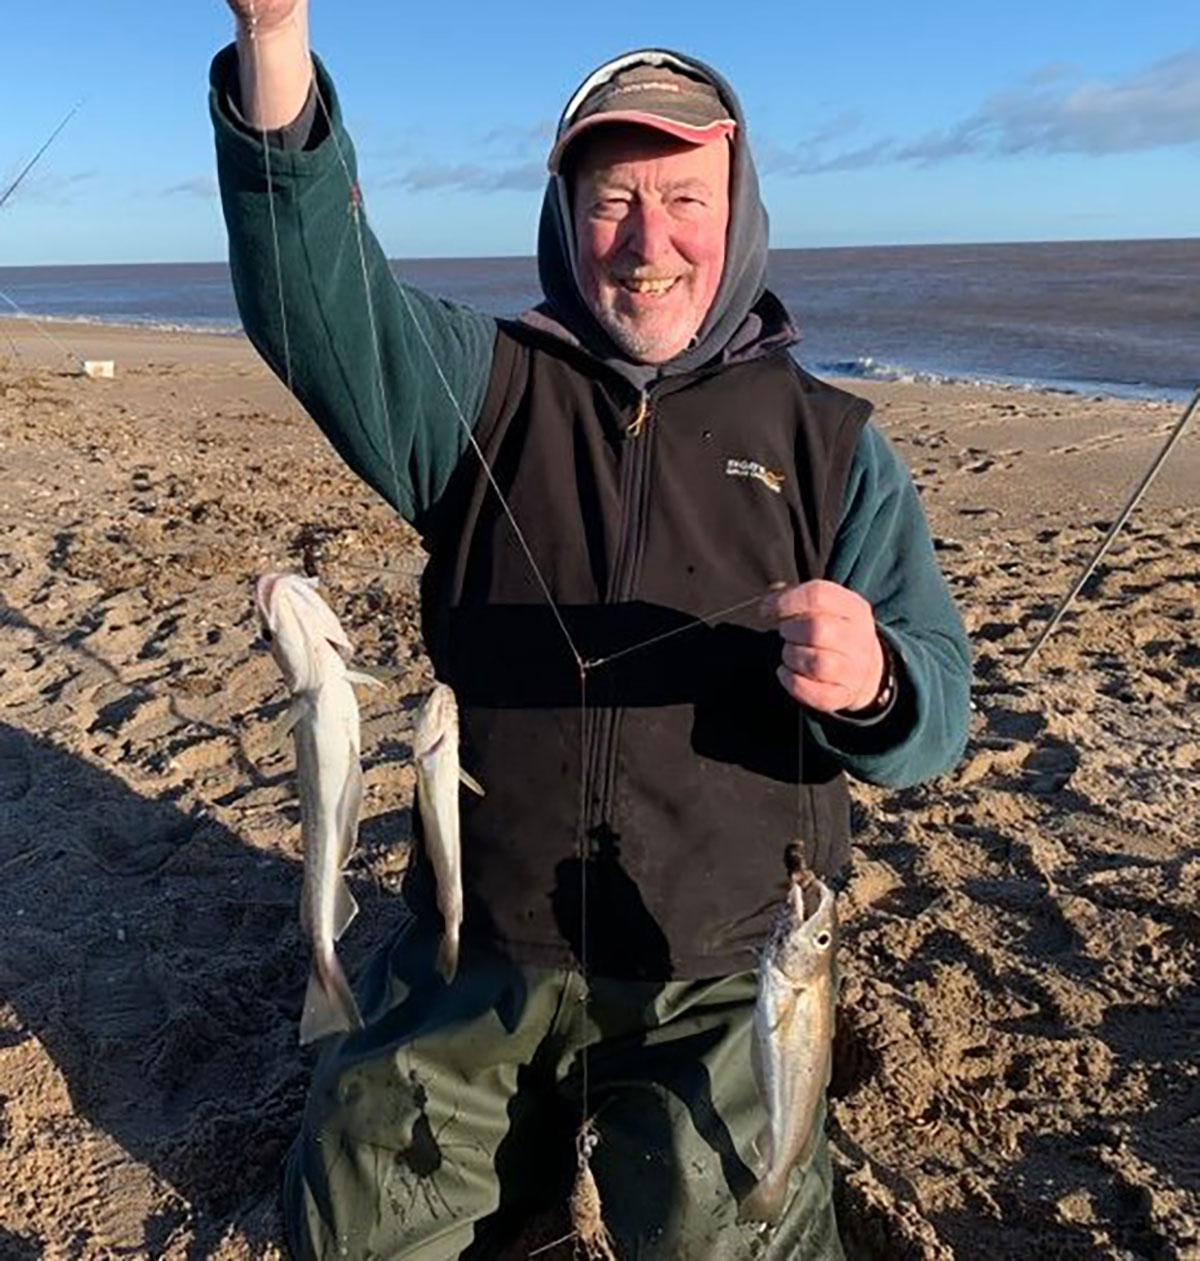 Second placed Garry Hutson with yet another whiting triple shot.